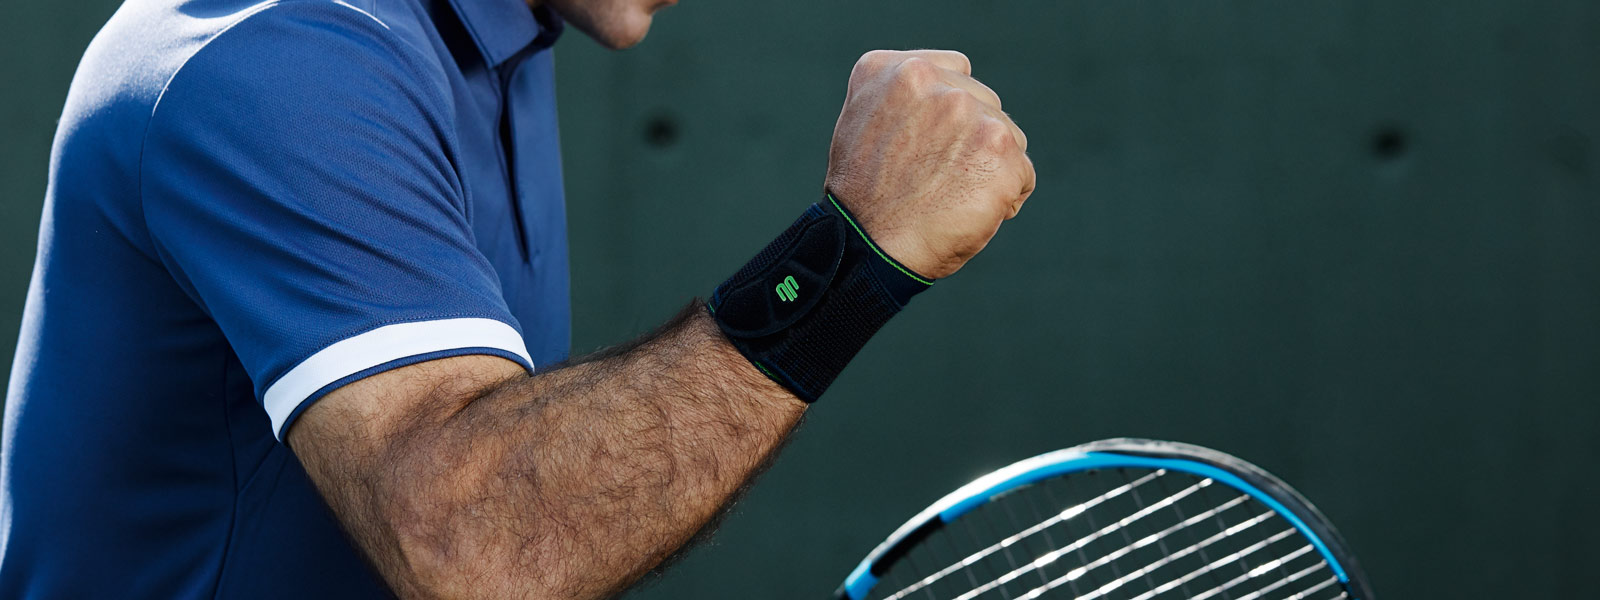 Tennis player with a black wrist bandage balls the fist